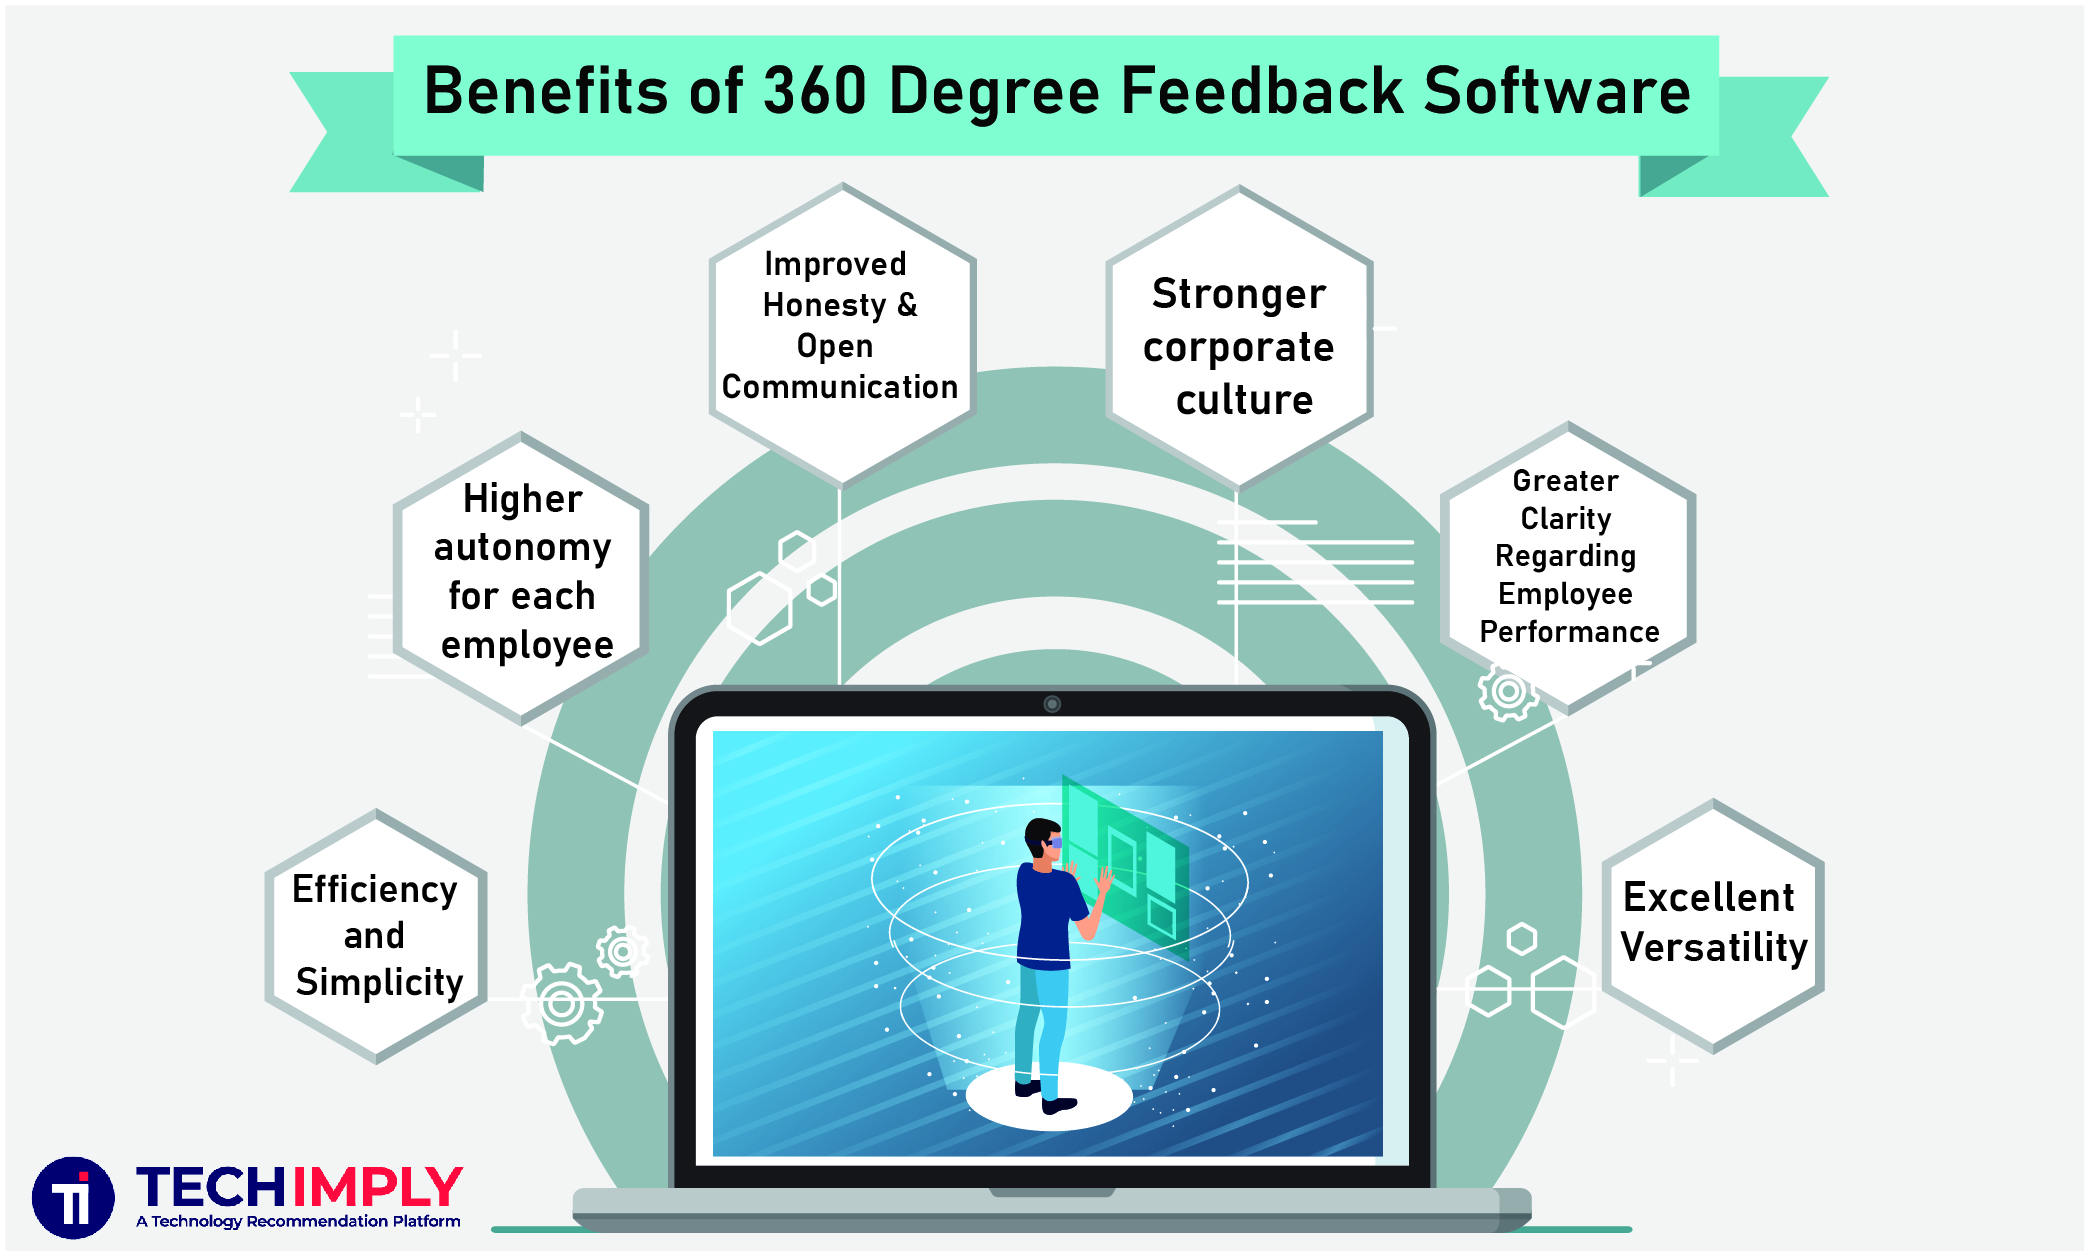 Benefits of 360 Degree Feedback Software